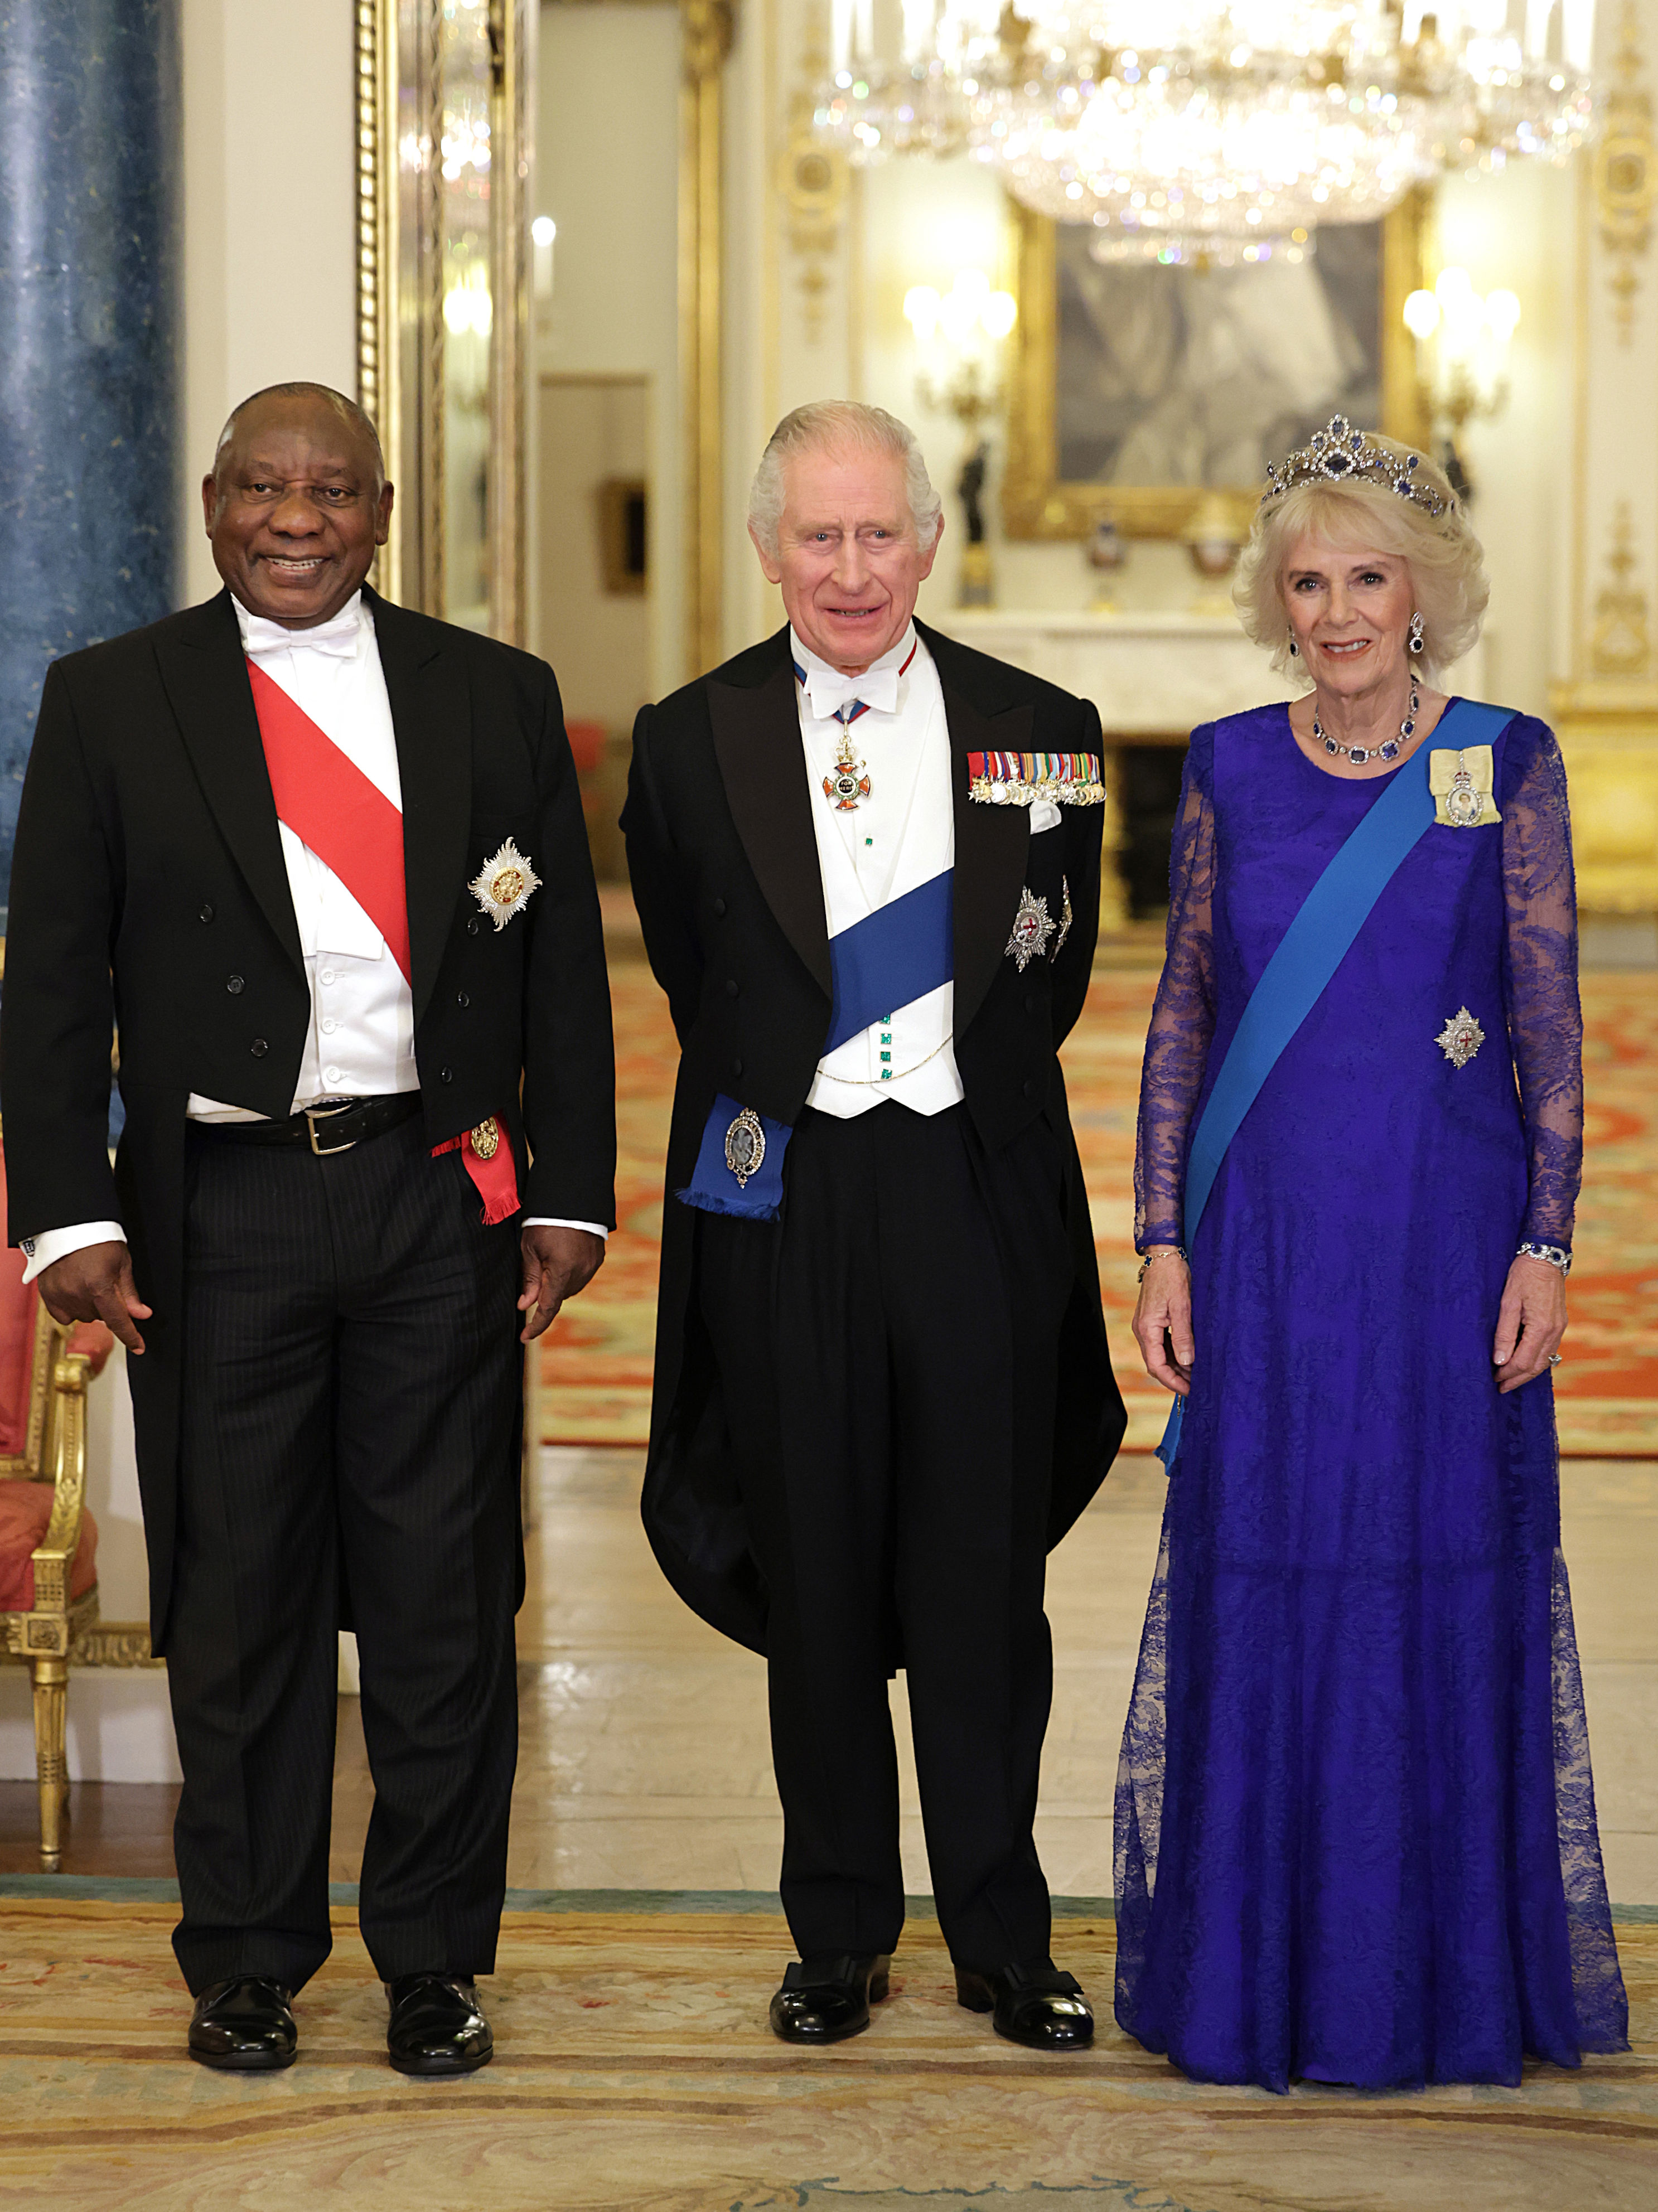 <p>President of South Africa Cyril Ramaphosa stood with King Charles III and Queen Consort Camilla during a State Banquet at Buckingham Palace in London on Nov. 22, 2022 -- the first state visit hosted by the U.K. with Charles as monarch, and the first state visit to Britain by a South African leader since 2010.</p>